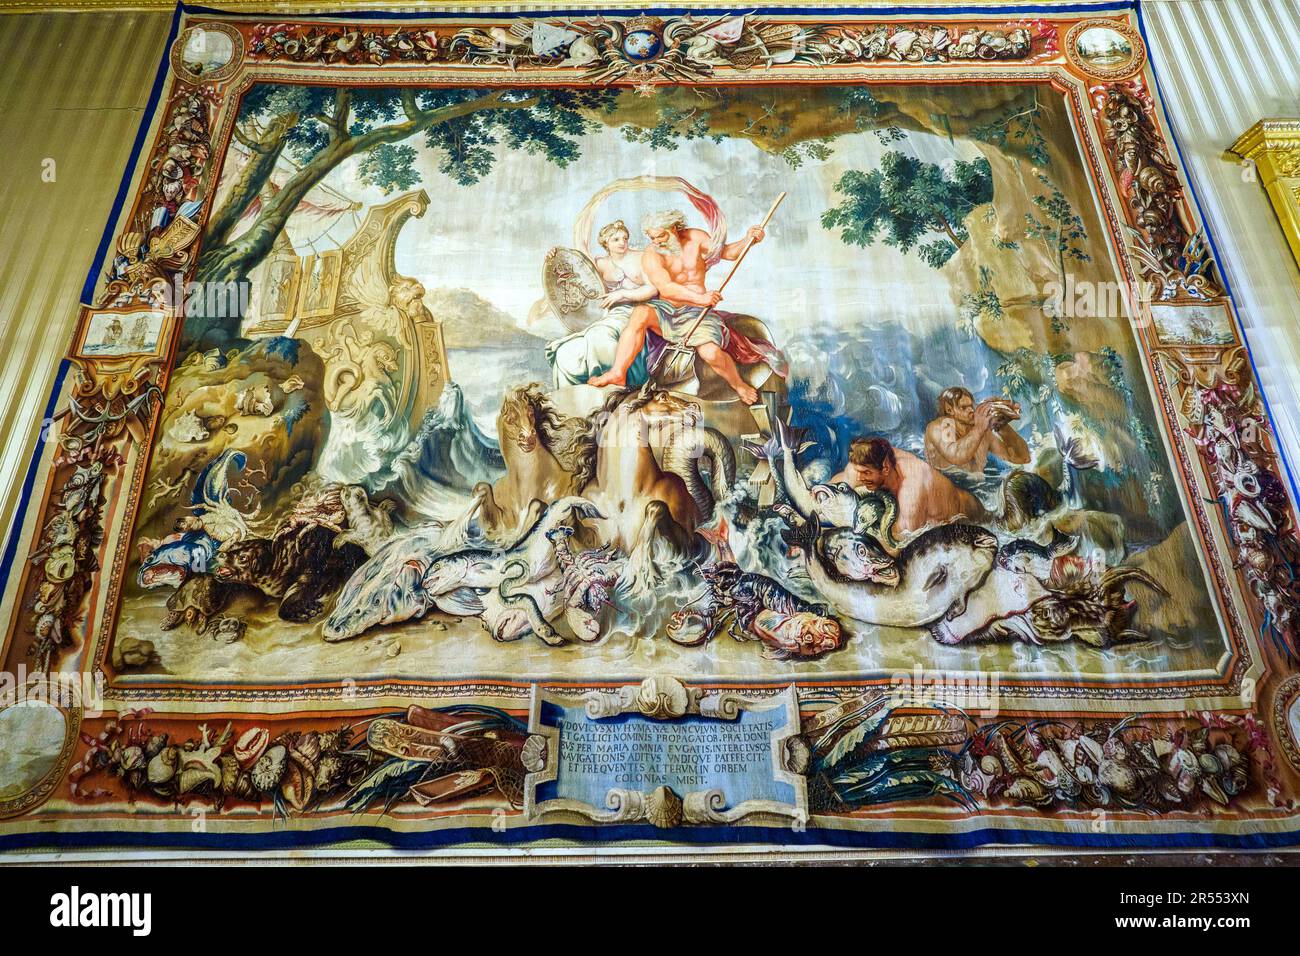 French tapestry from the Savoy period in the ambassador's Hall in the Royal Palace of Naples that In 1734 became the royal residence of the Bourbons - Naples, Italy Stock Photo